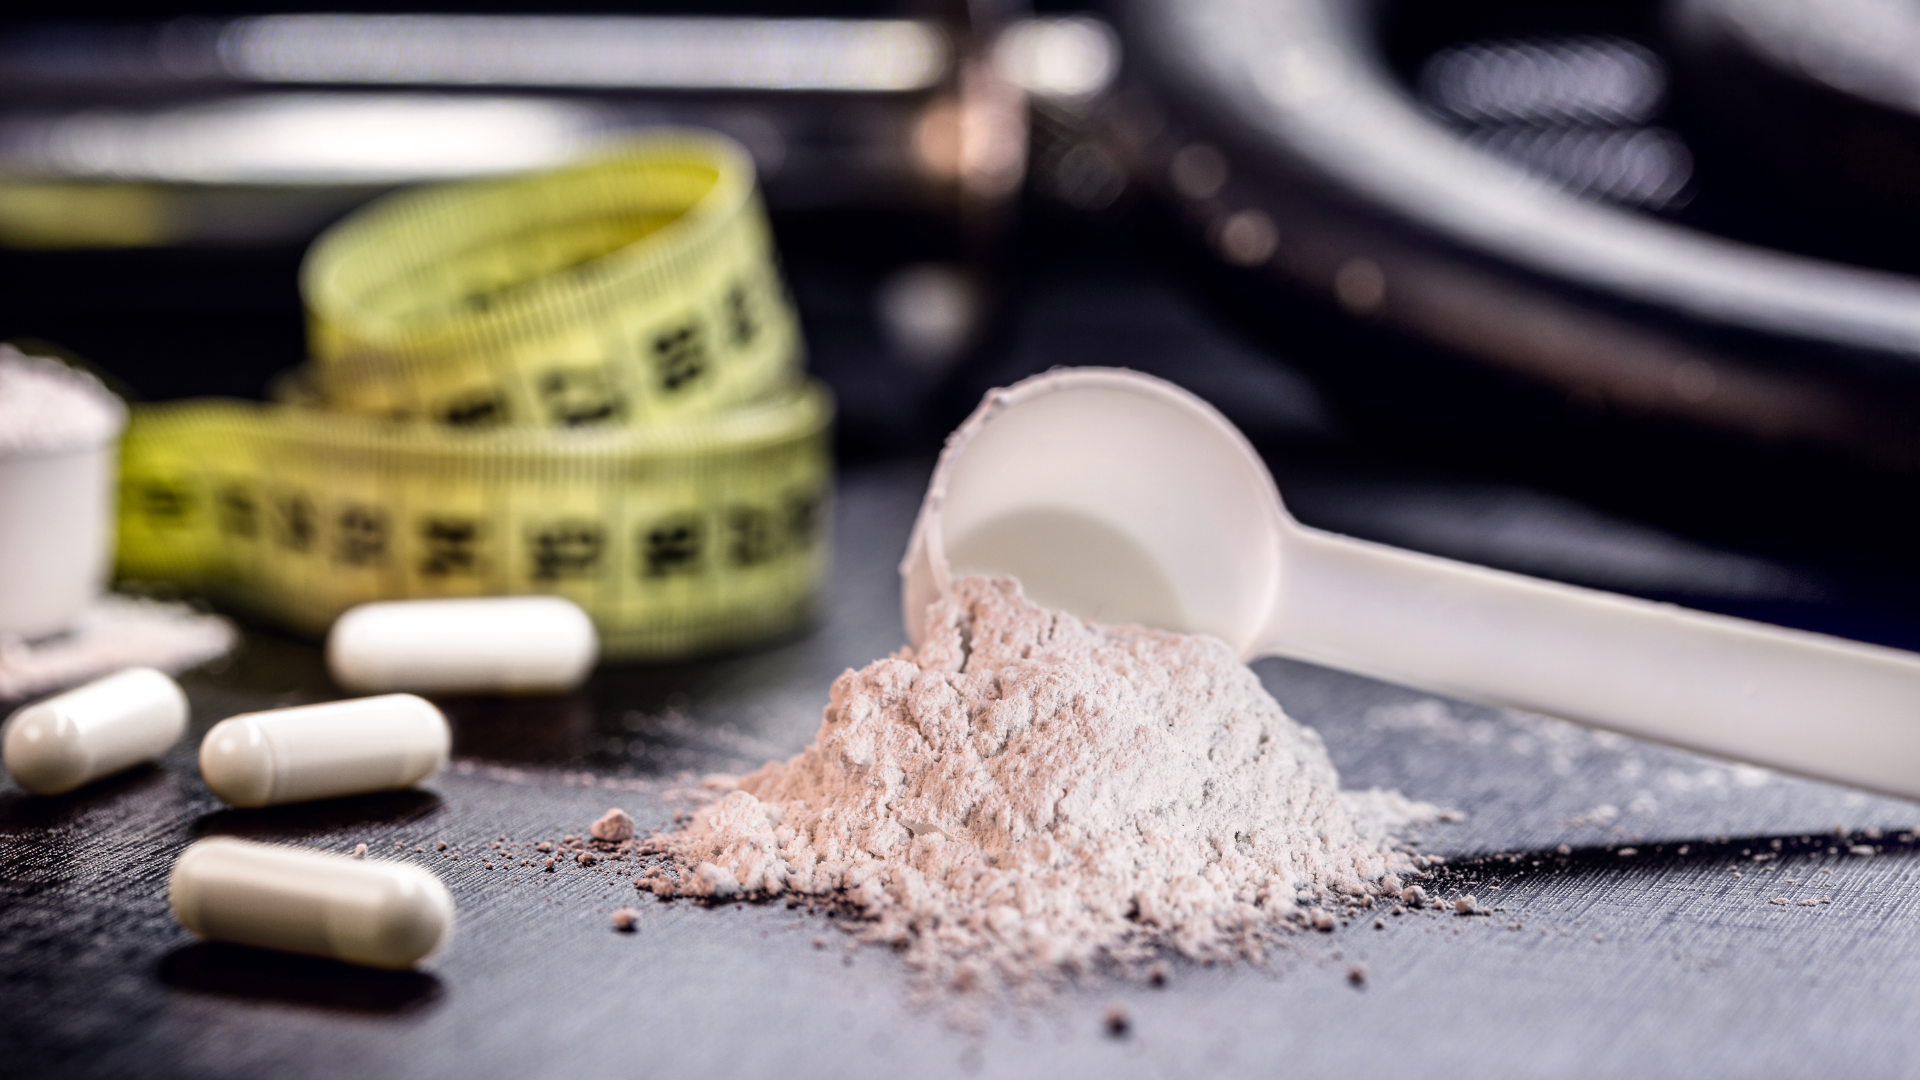 Ultimate guide to creatine powder